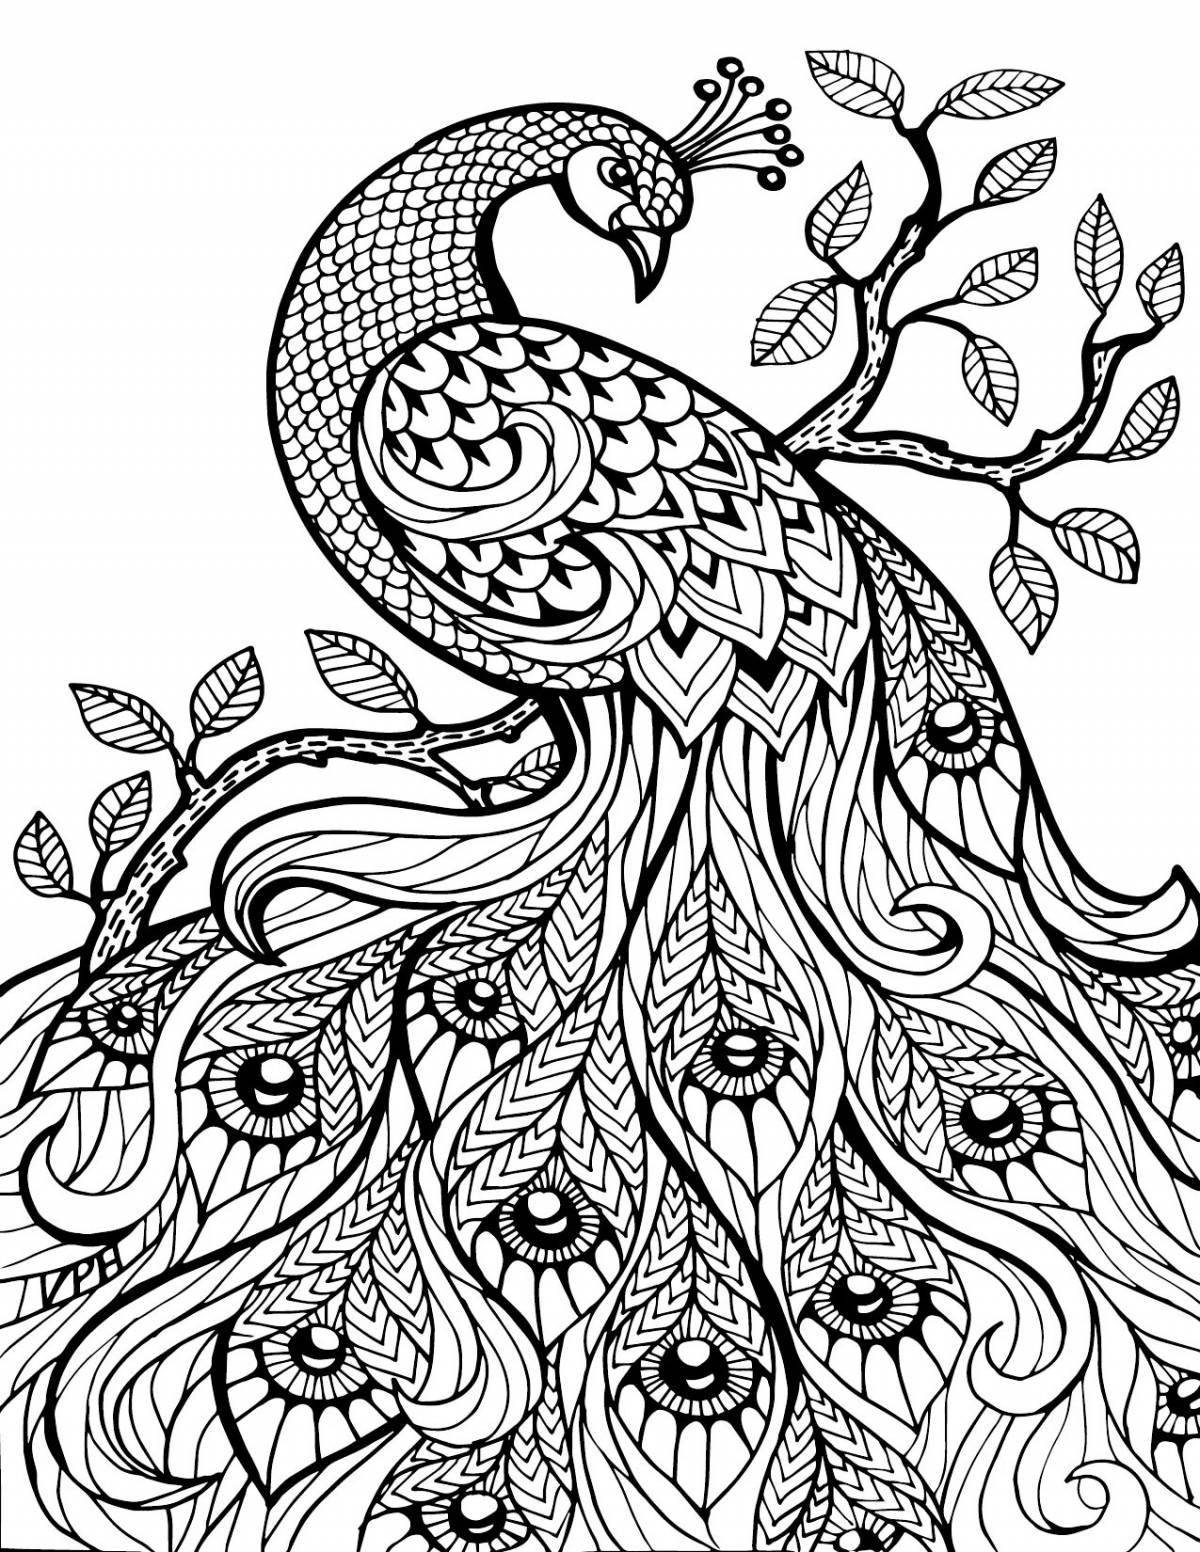 Intriguing coloring book with a pattern